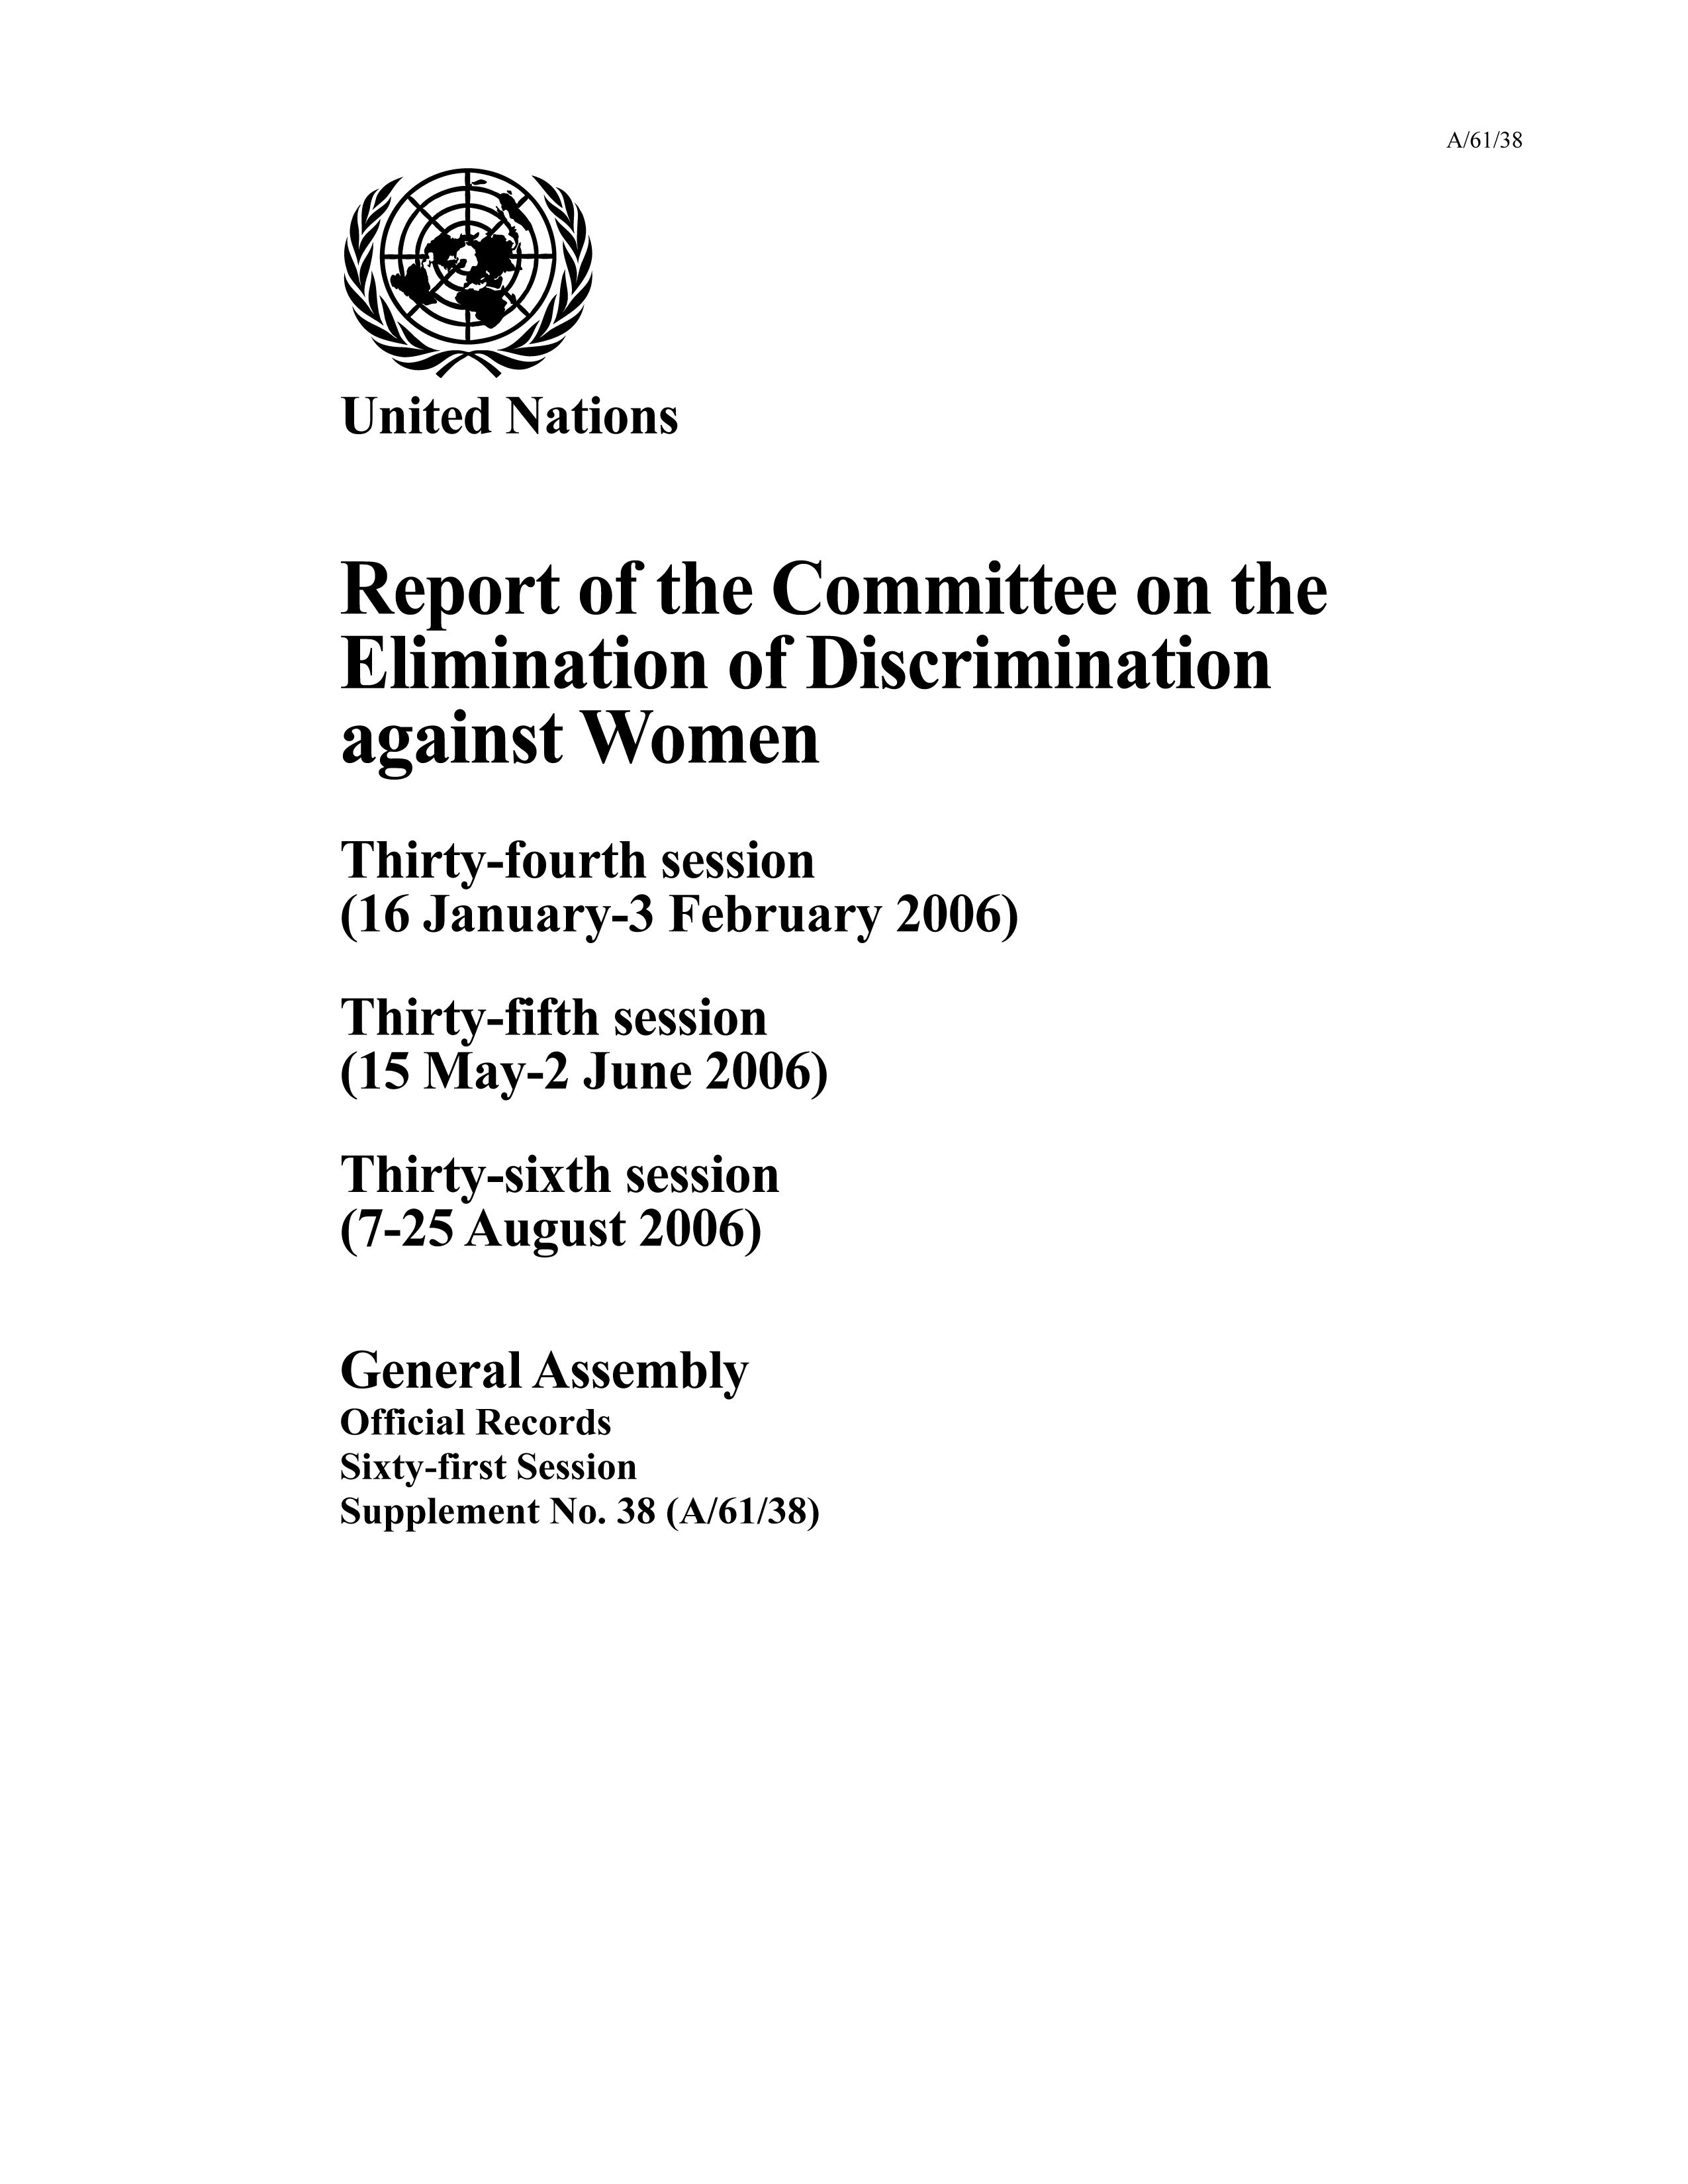 image of Activities carried out under the Optional Protocol to the Convention on the Elimination of All Forms of Discrimination against Women